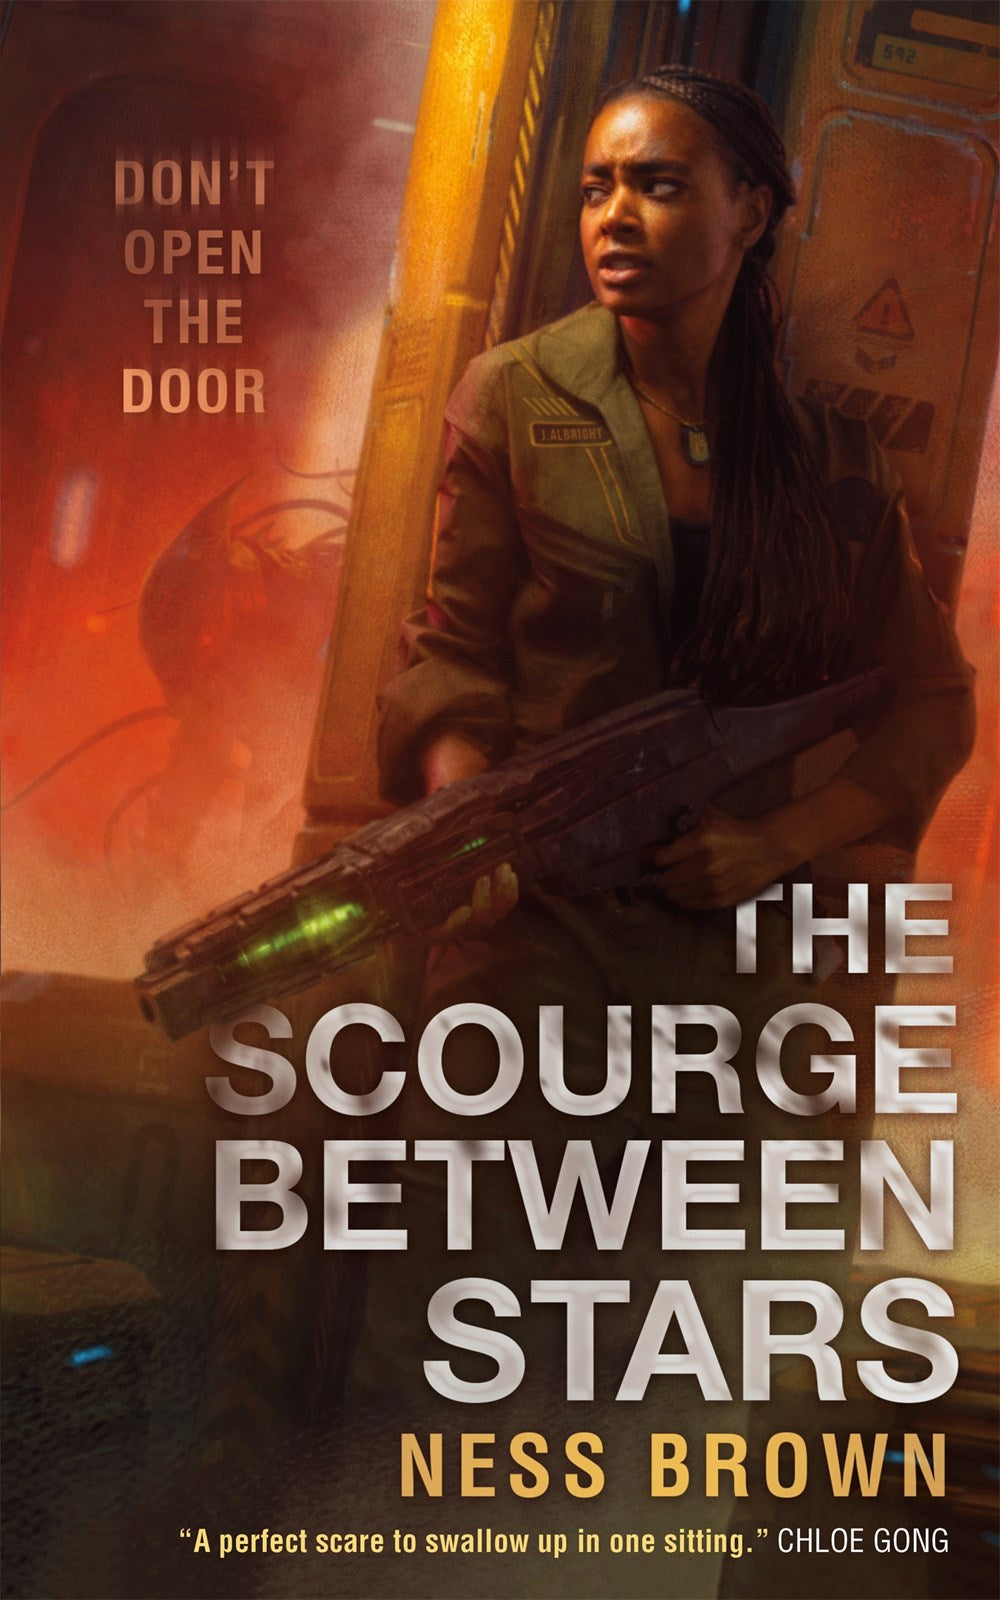 Scourge Between Stars Ness Brown scifi book